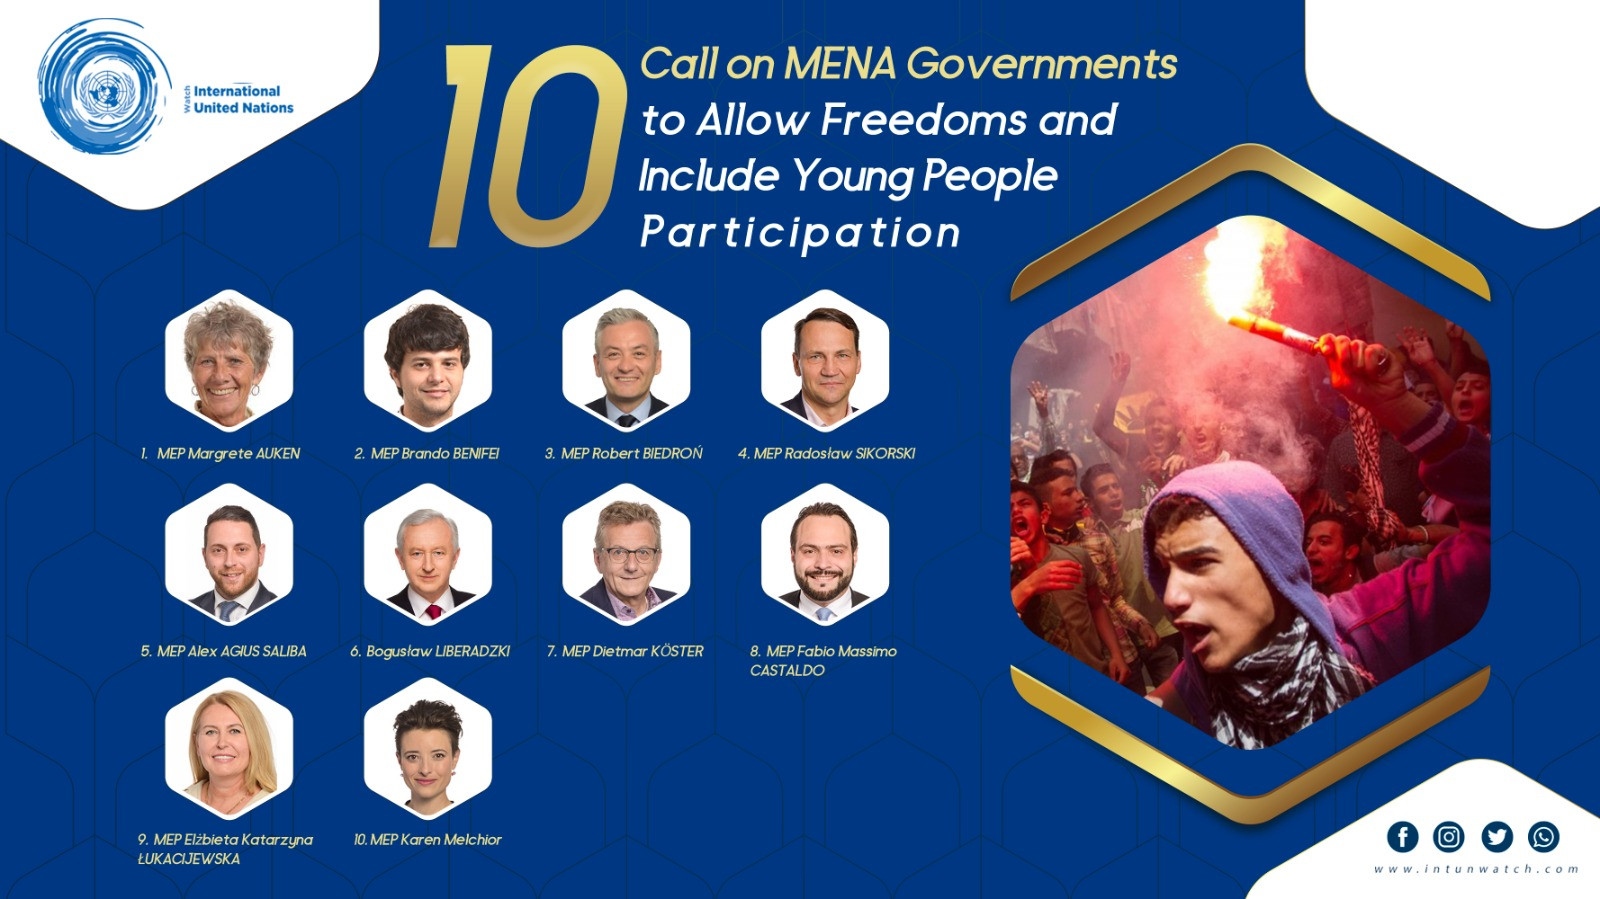  10 MEPs Call on MENA Governments to Allow Freedoms and Include Young People Participation